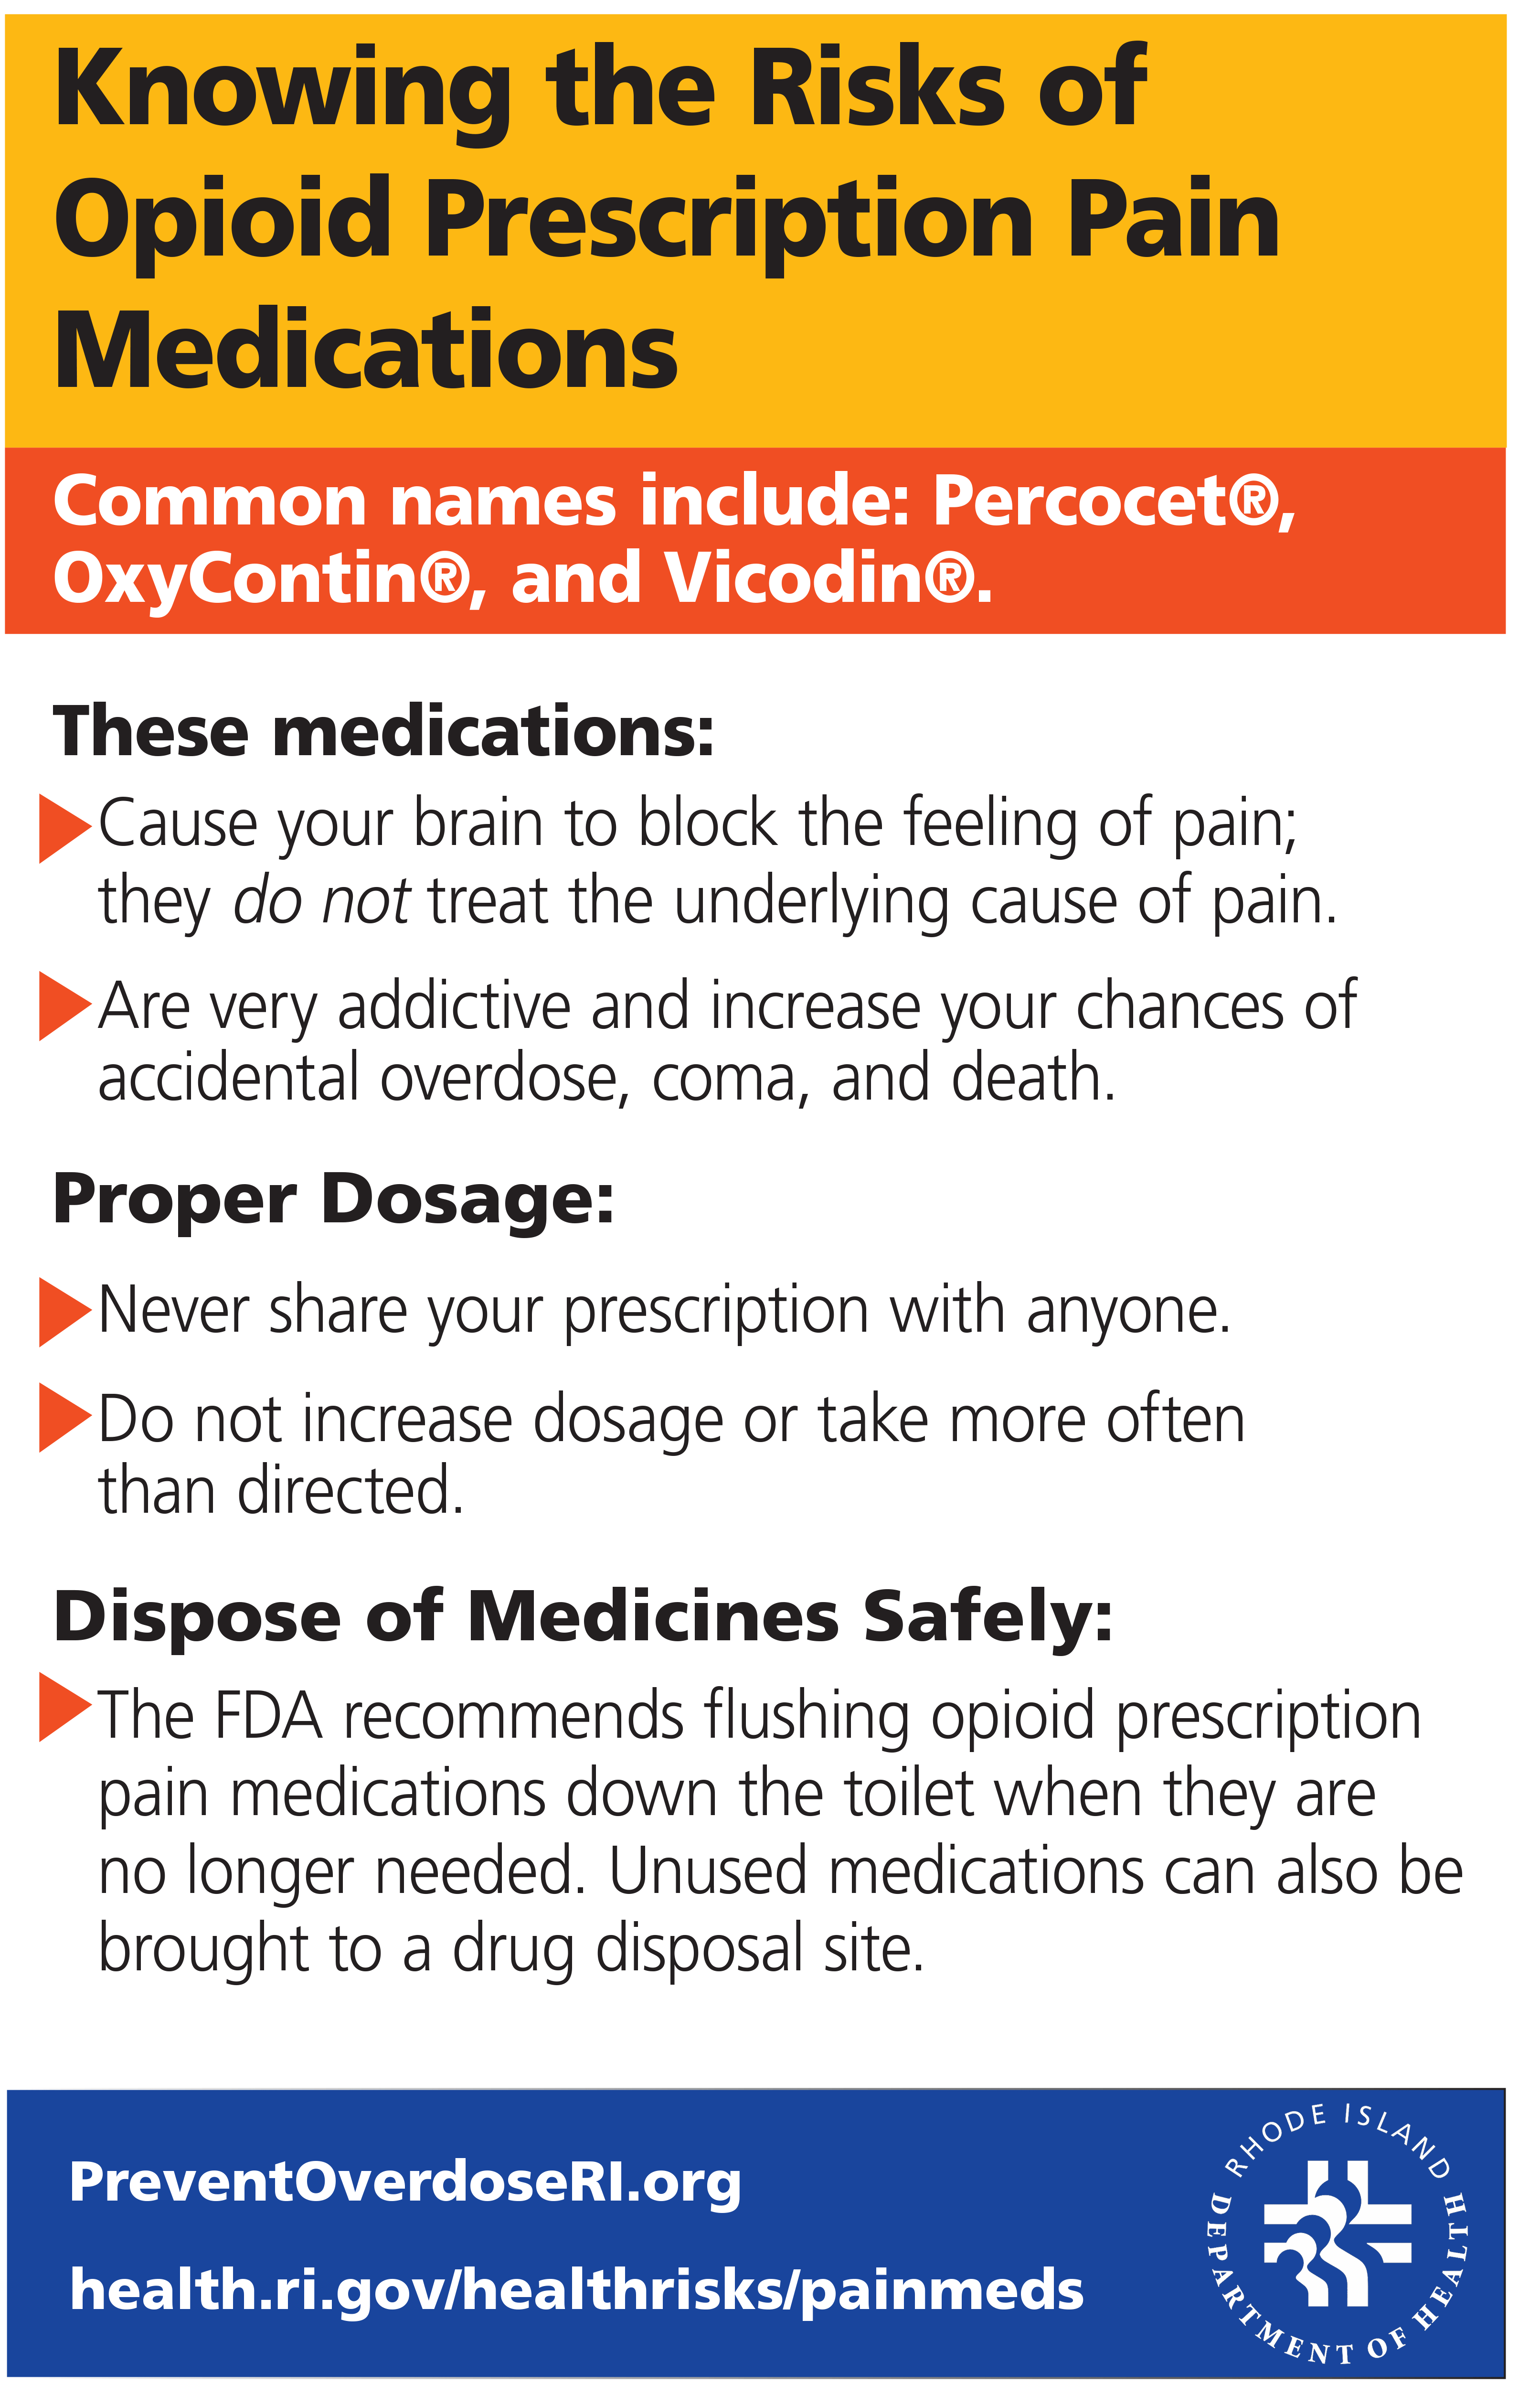 Knowing the Risks of Opioid Prescription Pain Medications